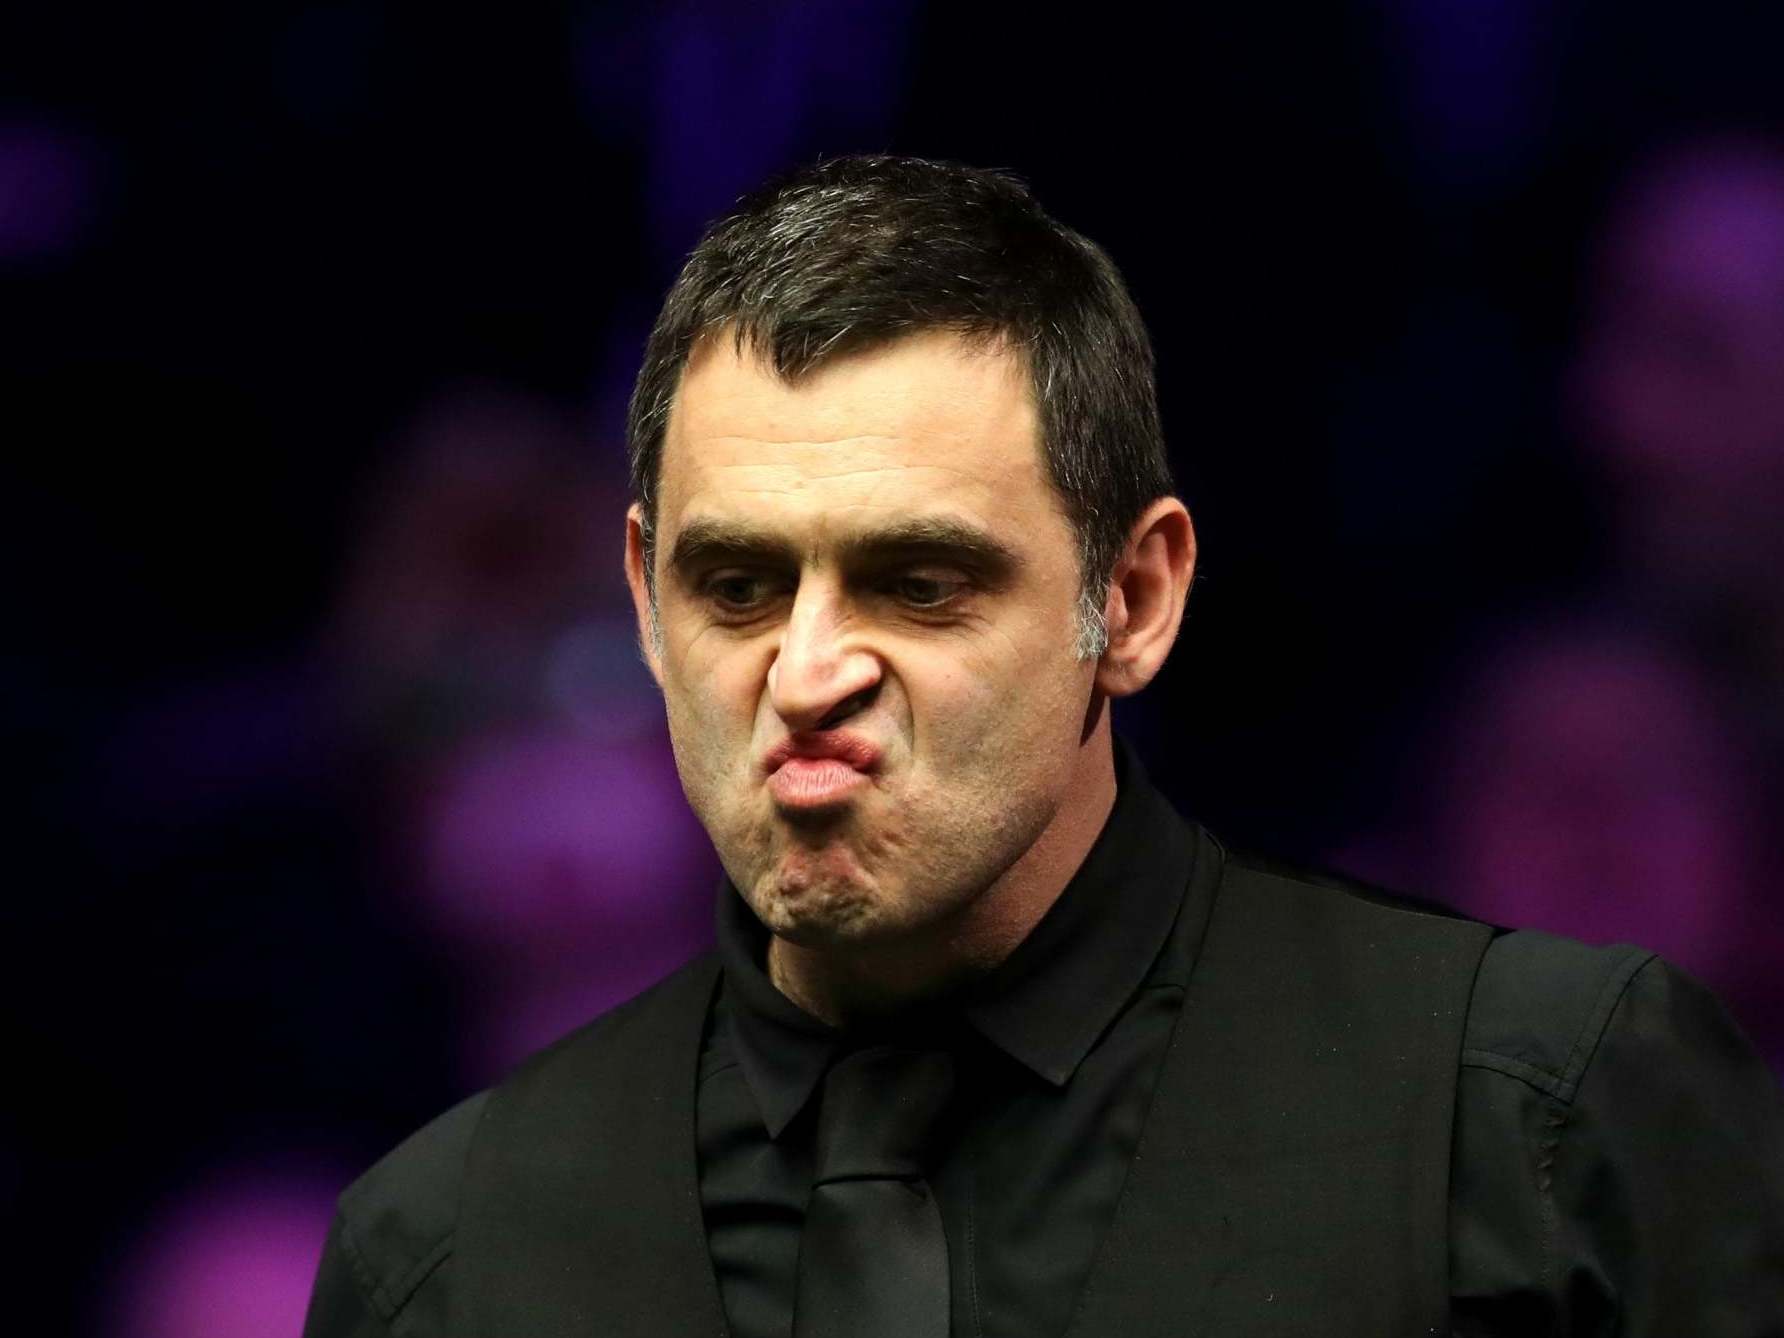 Ronnie O'Sullivan has voiced concerns about spectators at the Crucible